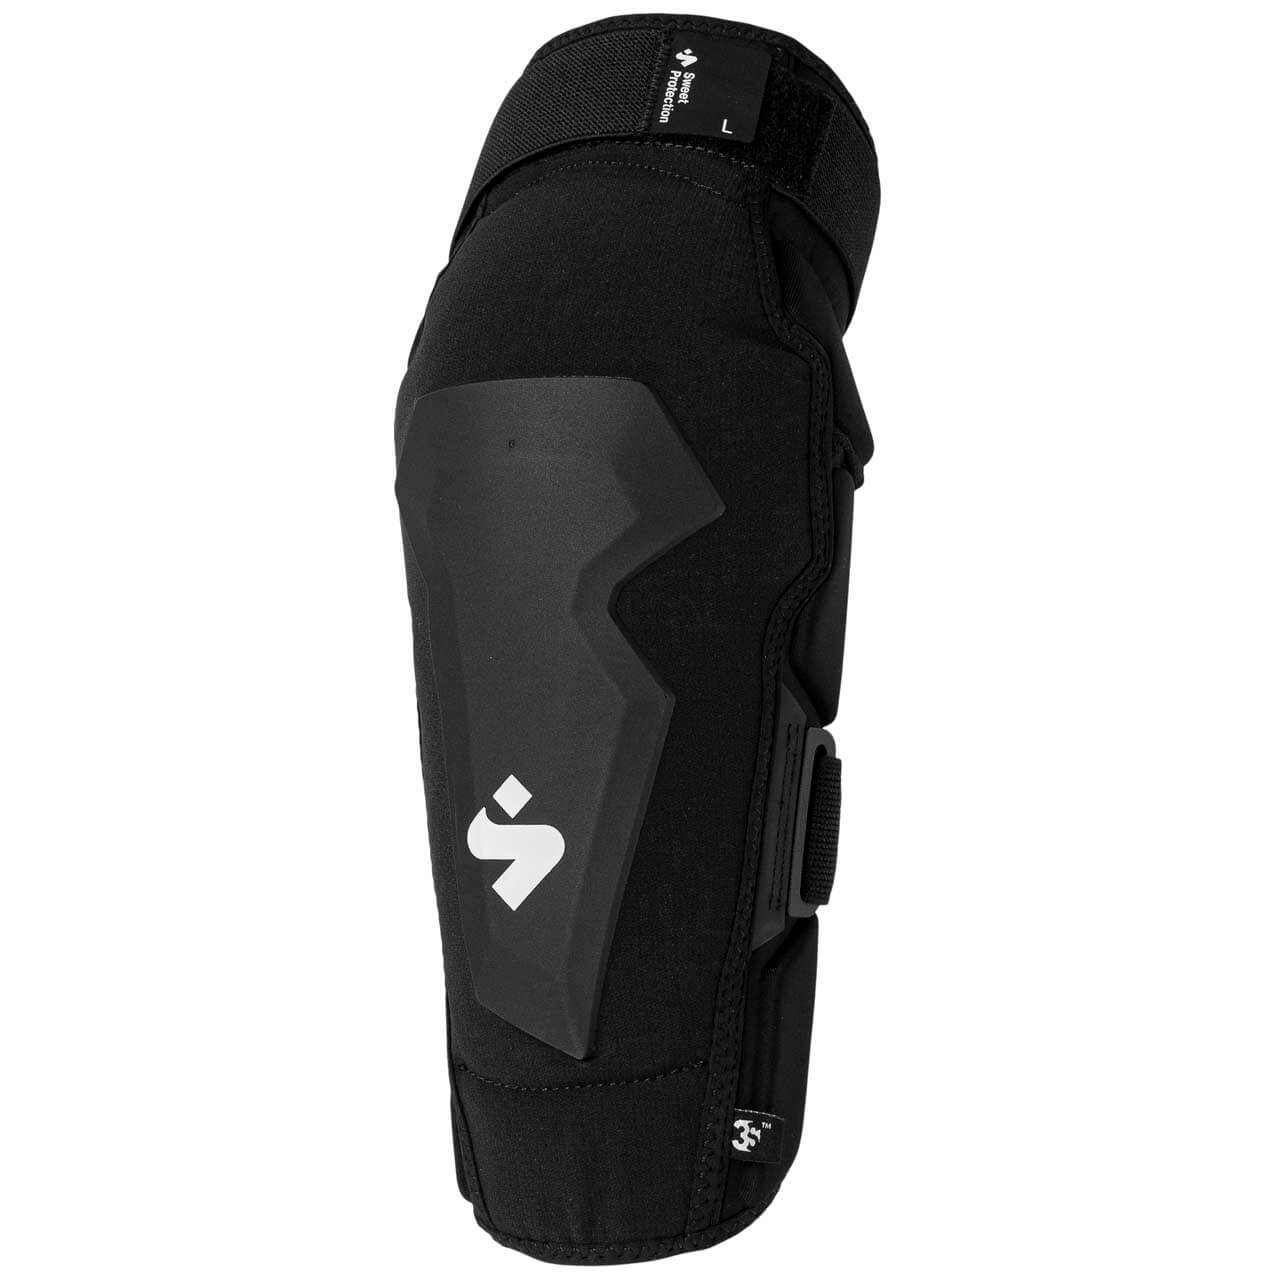 Sweet Protection Knee Guards Pro - Black, M